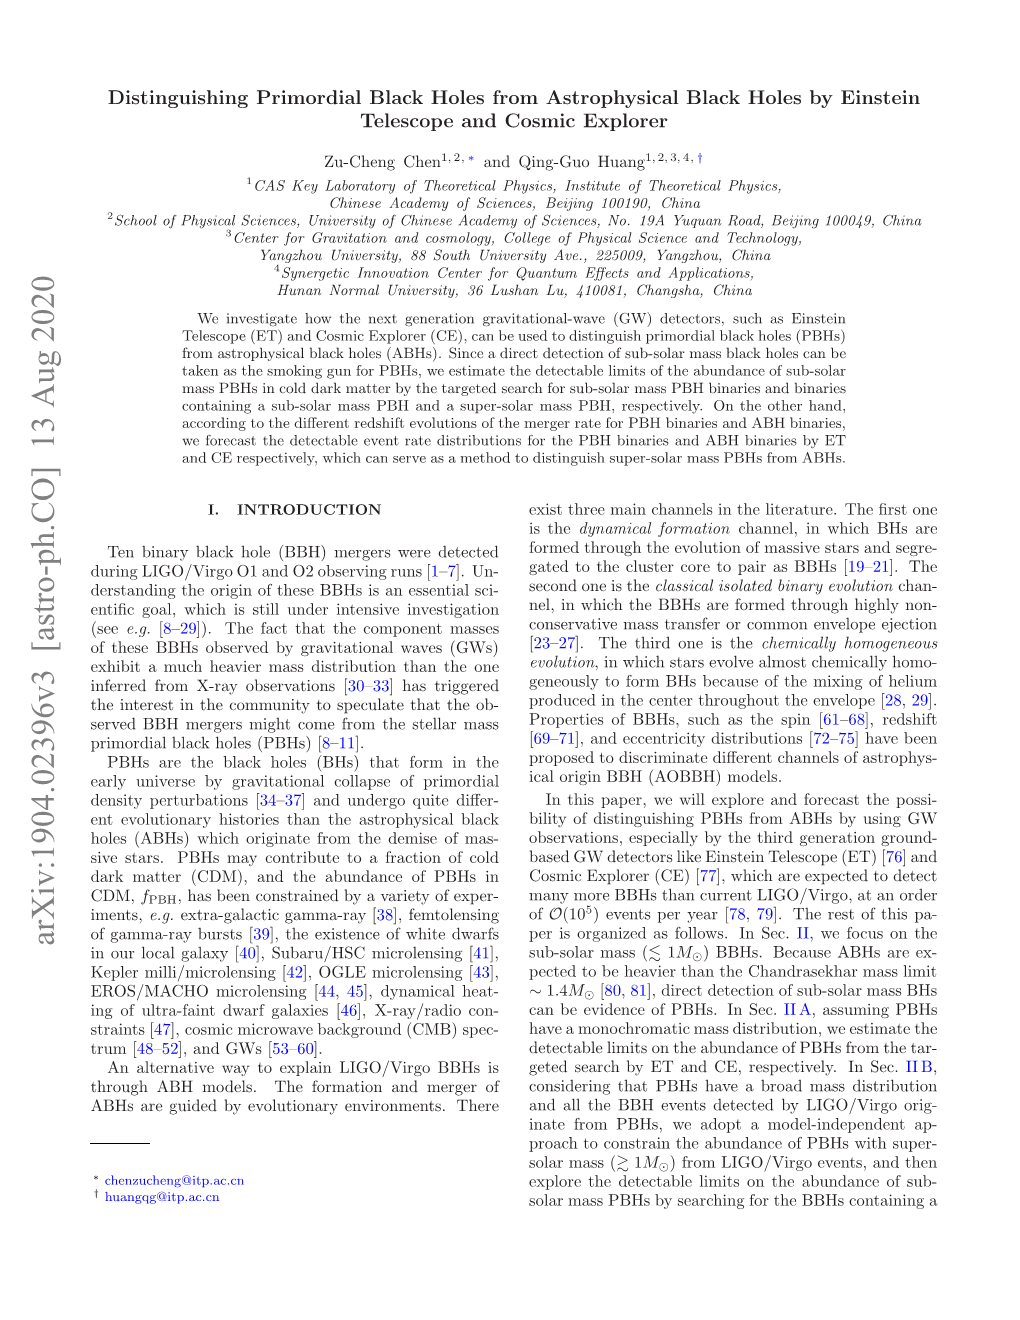 Arxiv:1904.02396V3 [Astro-Ph.CO] 13 Aug 2020 Hog B Oes H Omto N Egrof Merger There and Environments